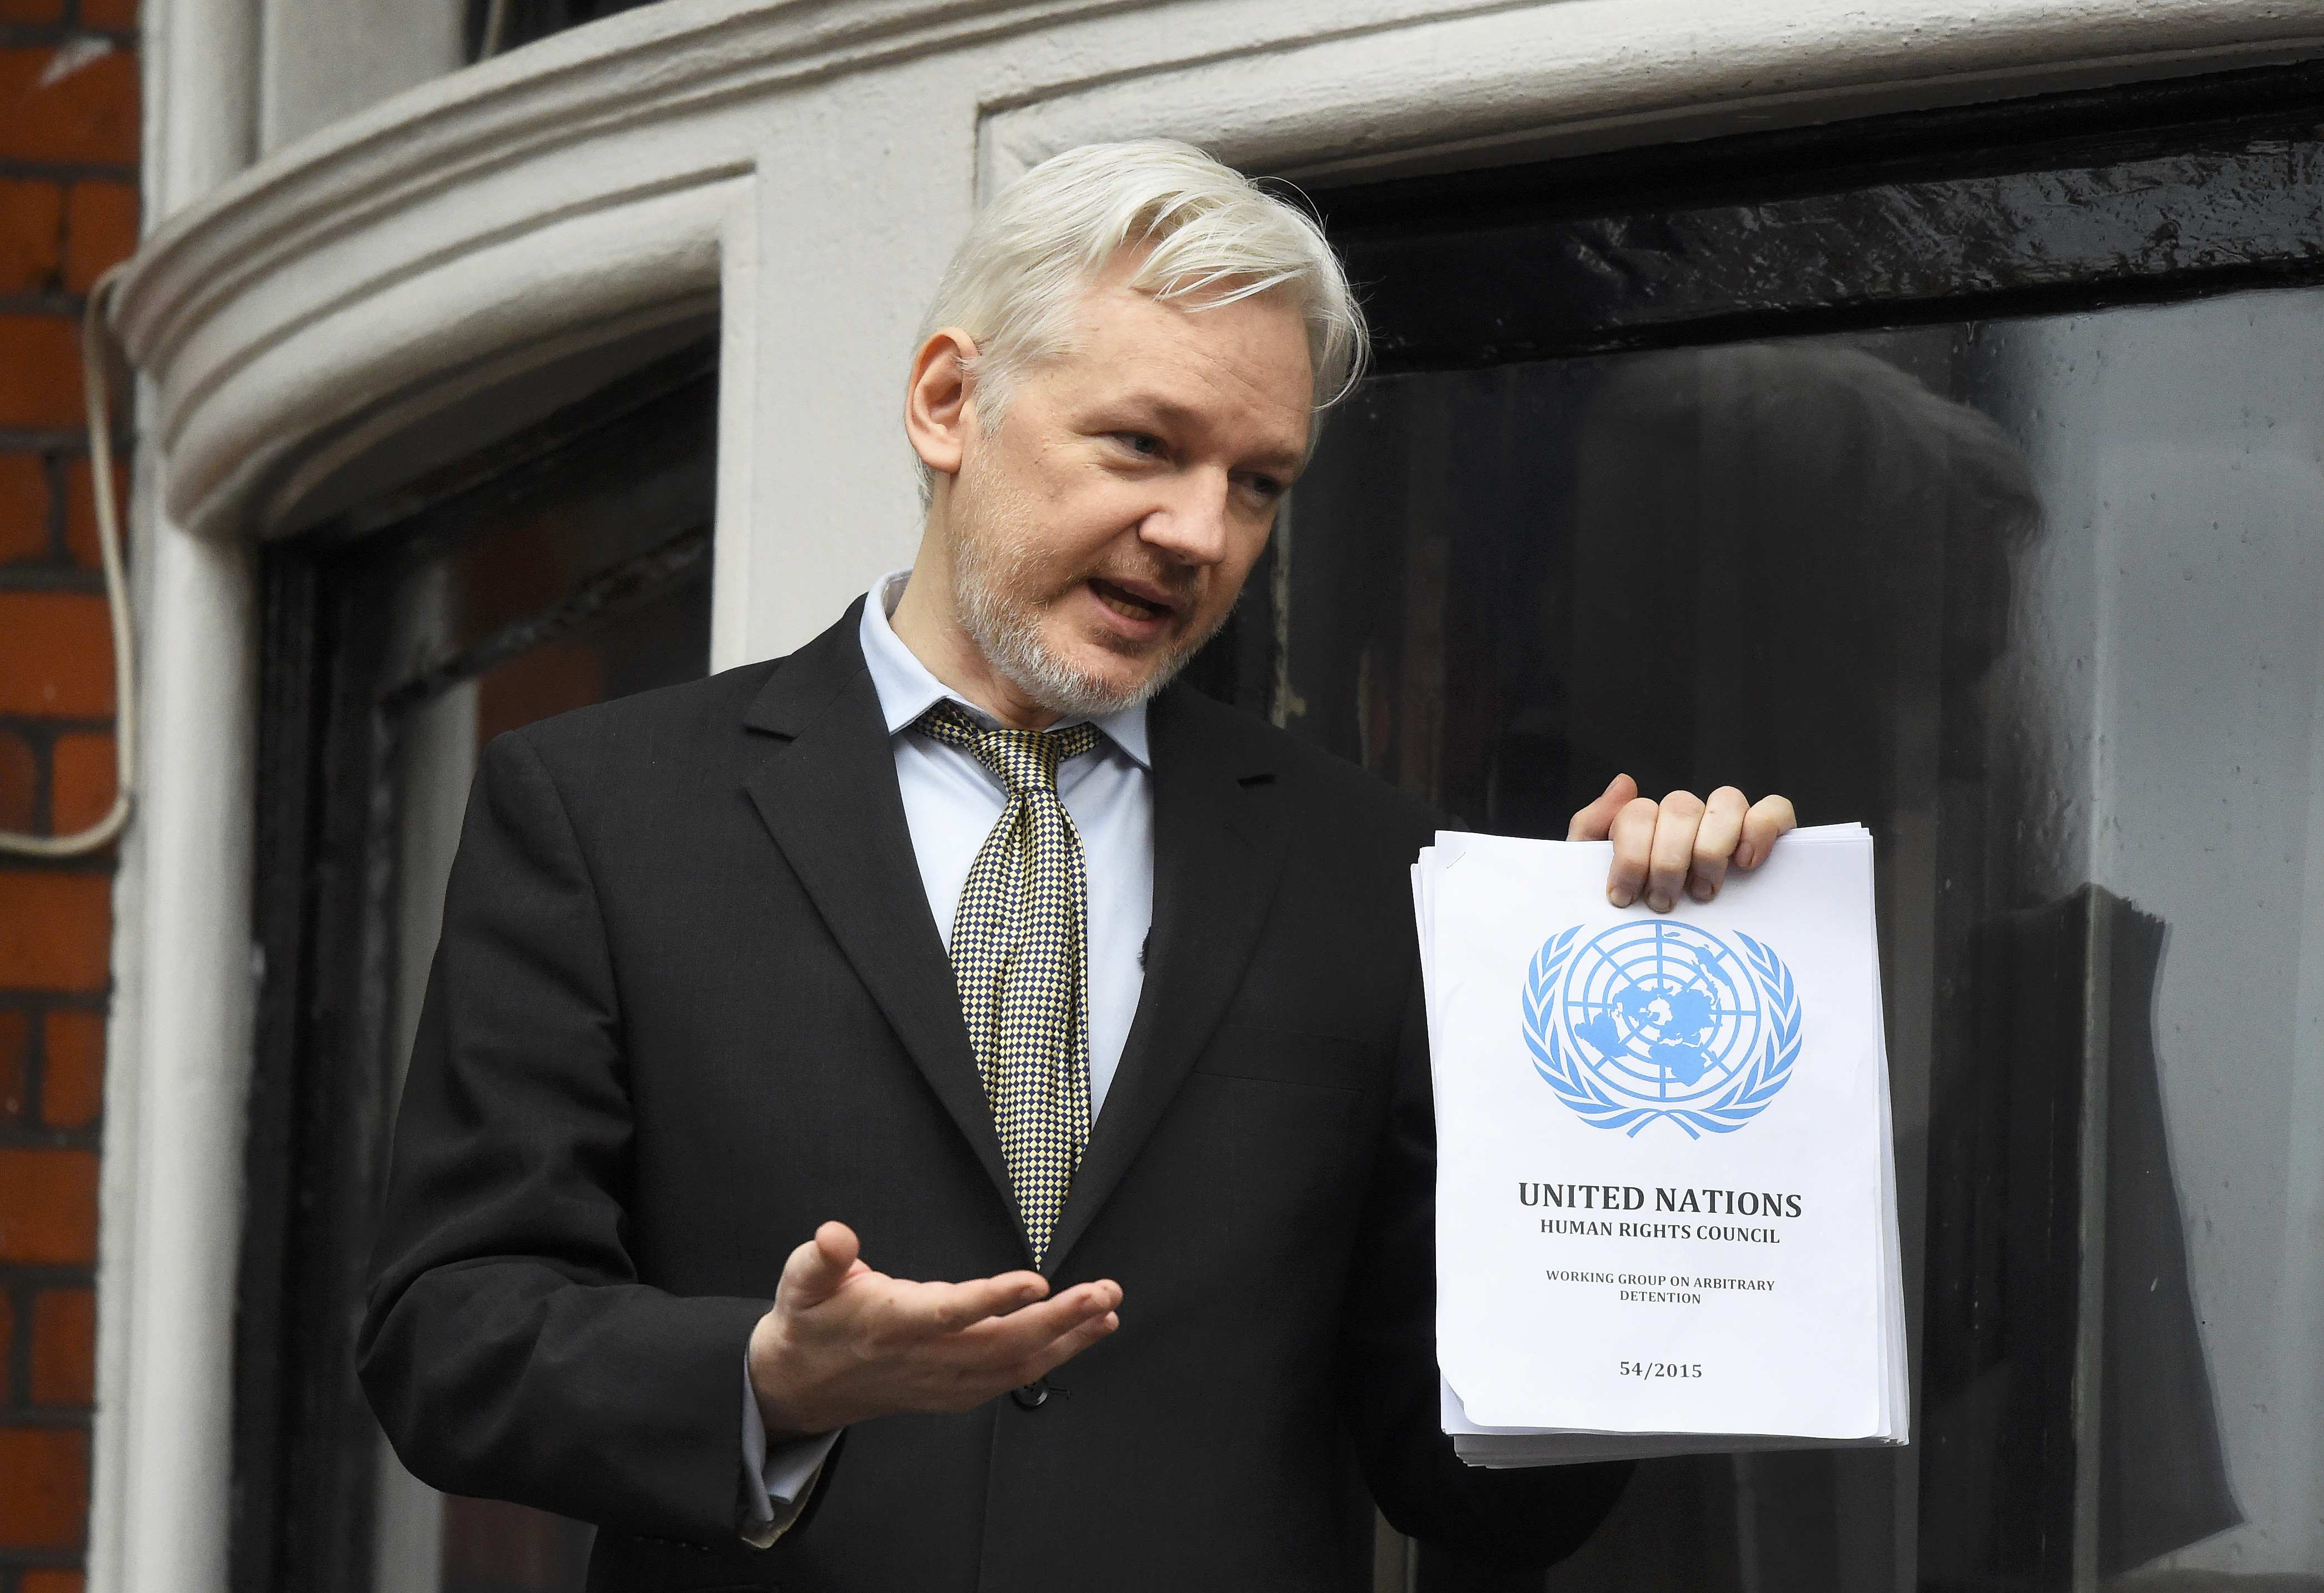 Julian Assange, founder of WikiLeaks, loses court appeal to have arrest